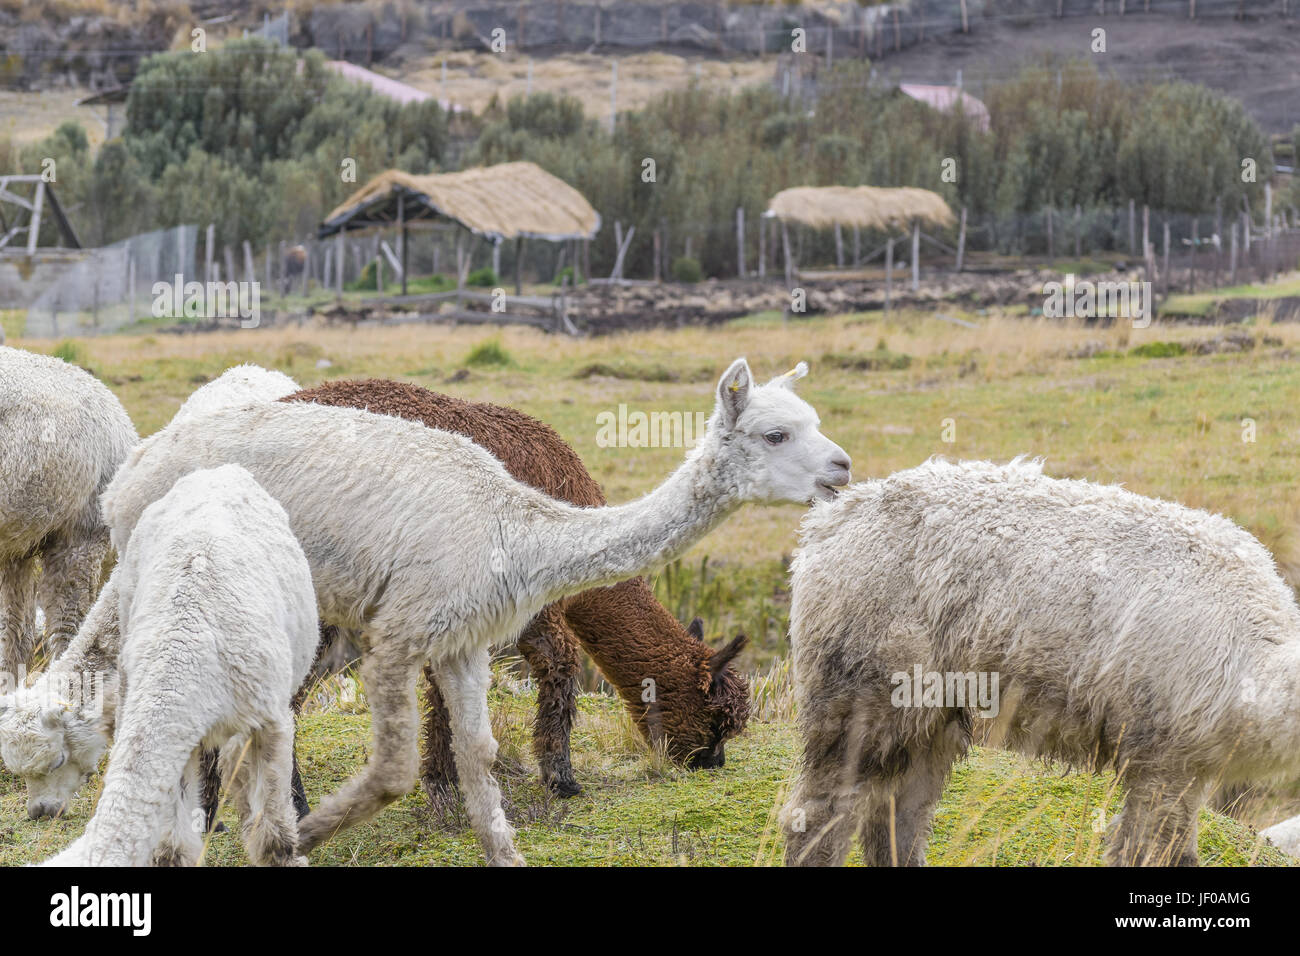 Andes Farm Animals Eating Pasture Stock Photo